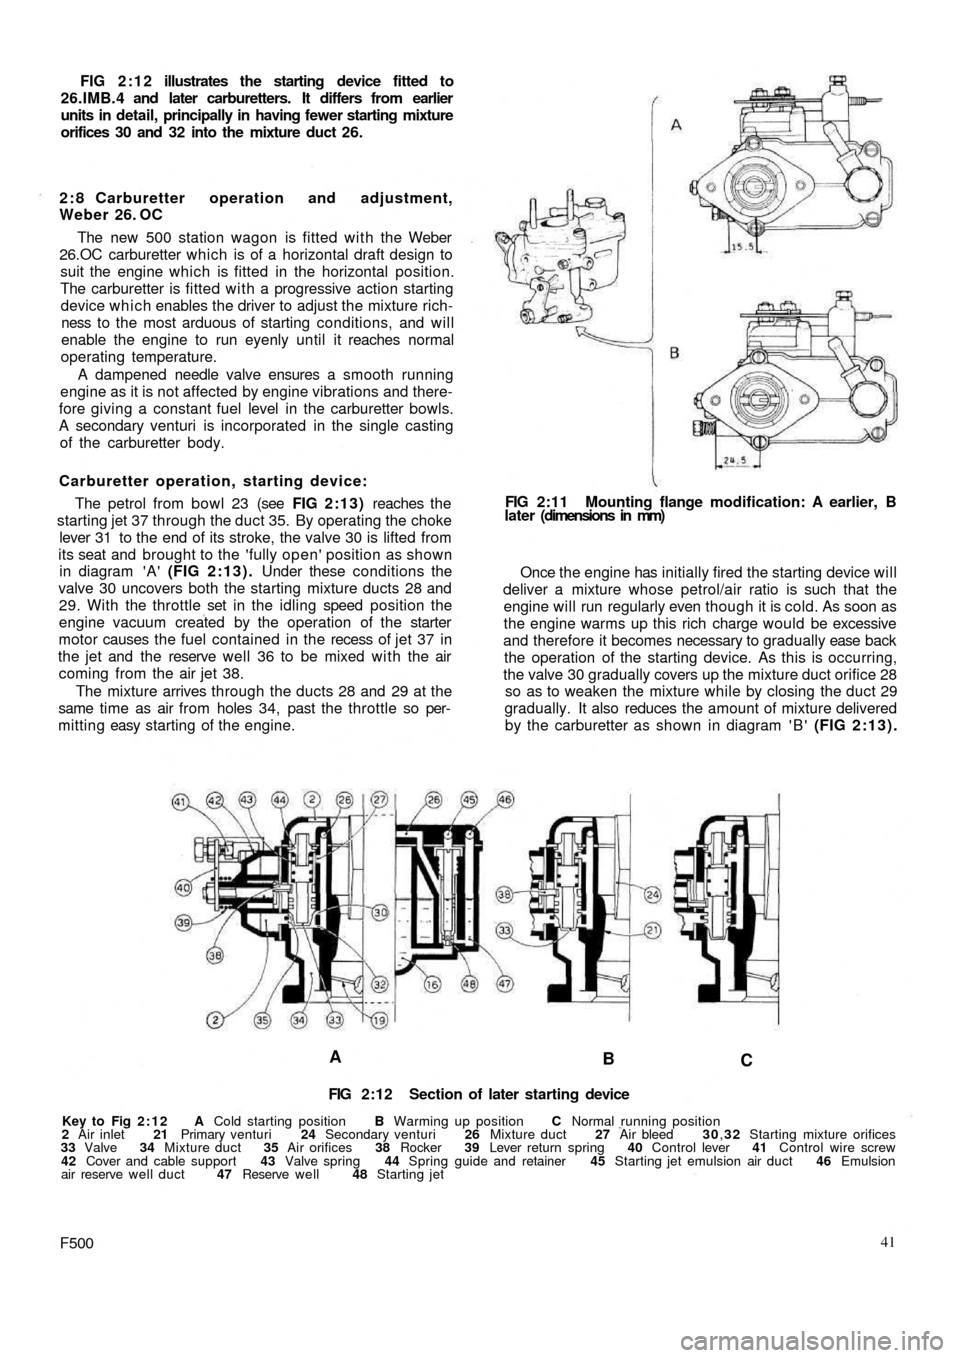 FIAT 500 1967 1.G Workshop Manual FIG 2:12 illustrates the starting device fitted to
26.IMB.4 and later carburetters. It differs from earlier
units in detail, principally in having fewer starting mixture
orifices 30 and 32 into the mi